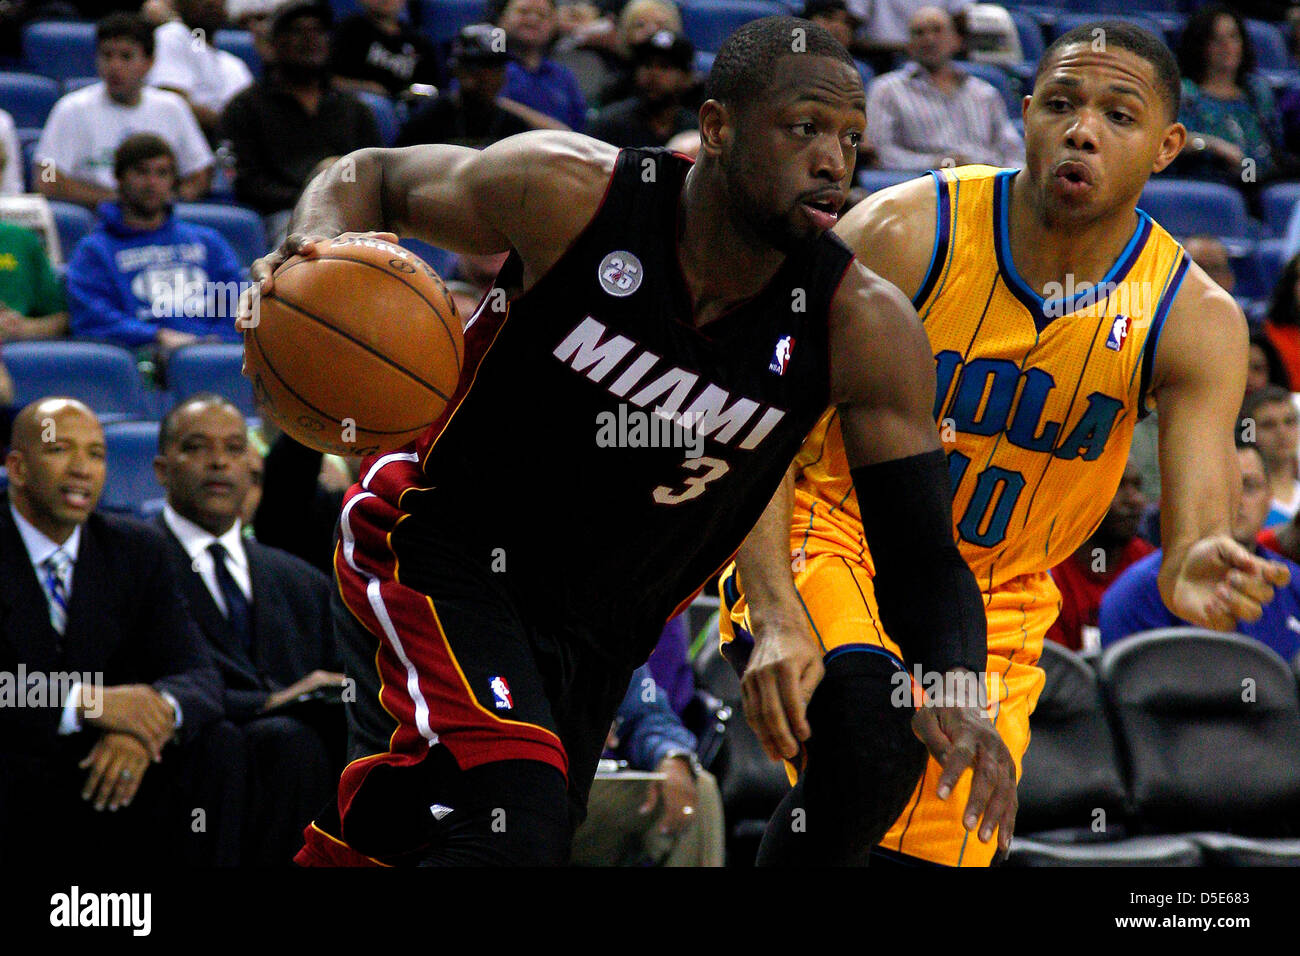 March 29, 2013 - New Orleans, Louisiana, United States of America - March 29, 2013: Miami Heat shooting guard Dwyane Wade (3) drives against New Orleans Hornets shooting guard Eric Gordon (10) during the NBA basketball game between the New Orleans Hornets and the Miami Heat at the New Orleans Arena in New Orleans, LA. Stock Photo